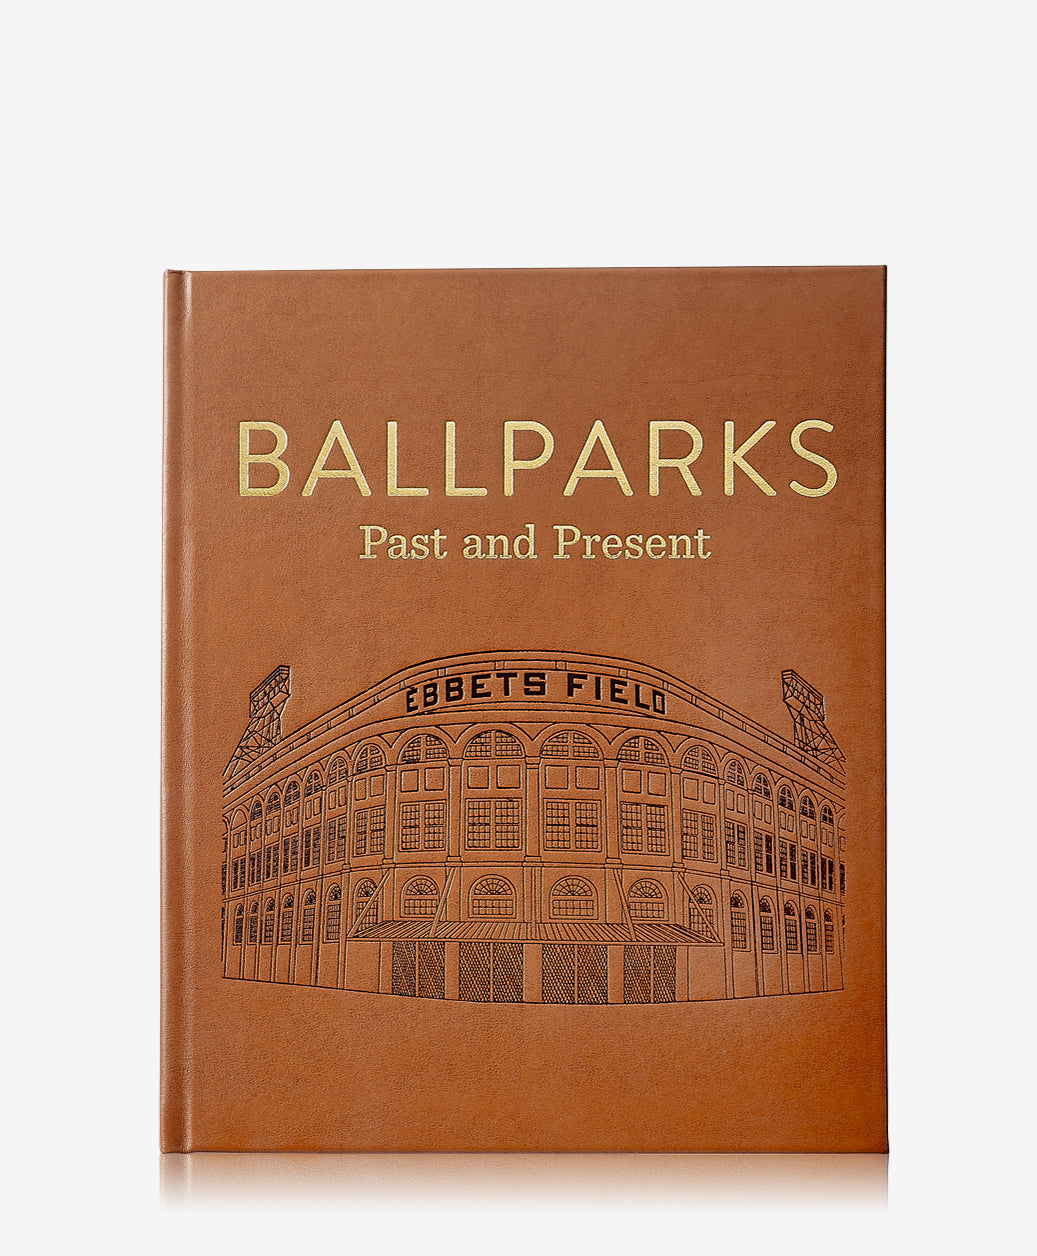 Ballparks Past and Present